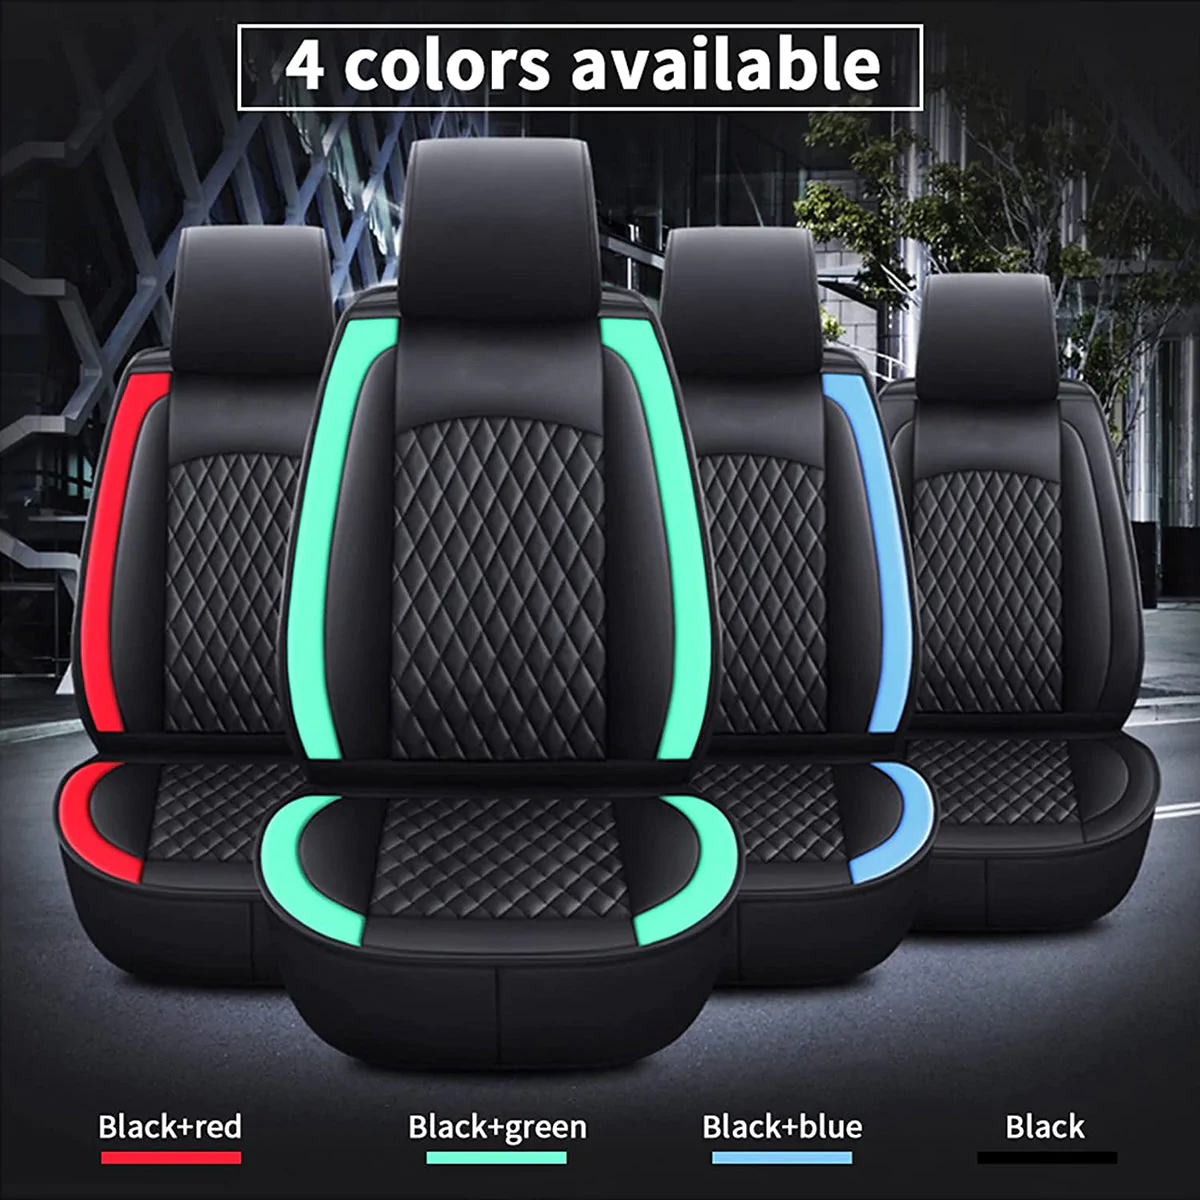 Custom Text For Seat Covers 5 Seats Full Set, Custom Fit For Your Cars, Leatherette Automotive Seat Cushion Protector Universal Fit, Vehicle Auto Interior Decor RA13988